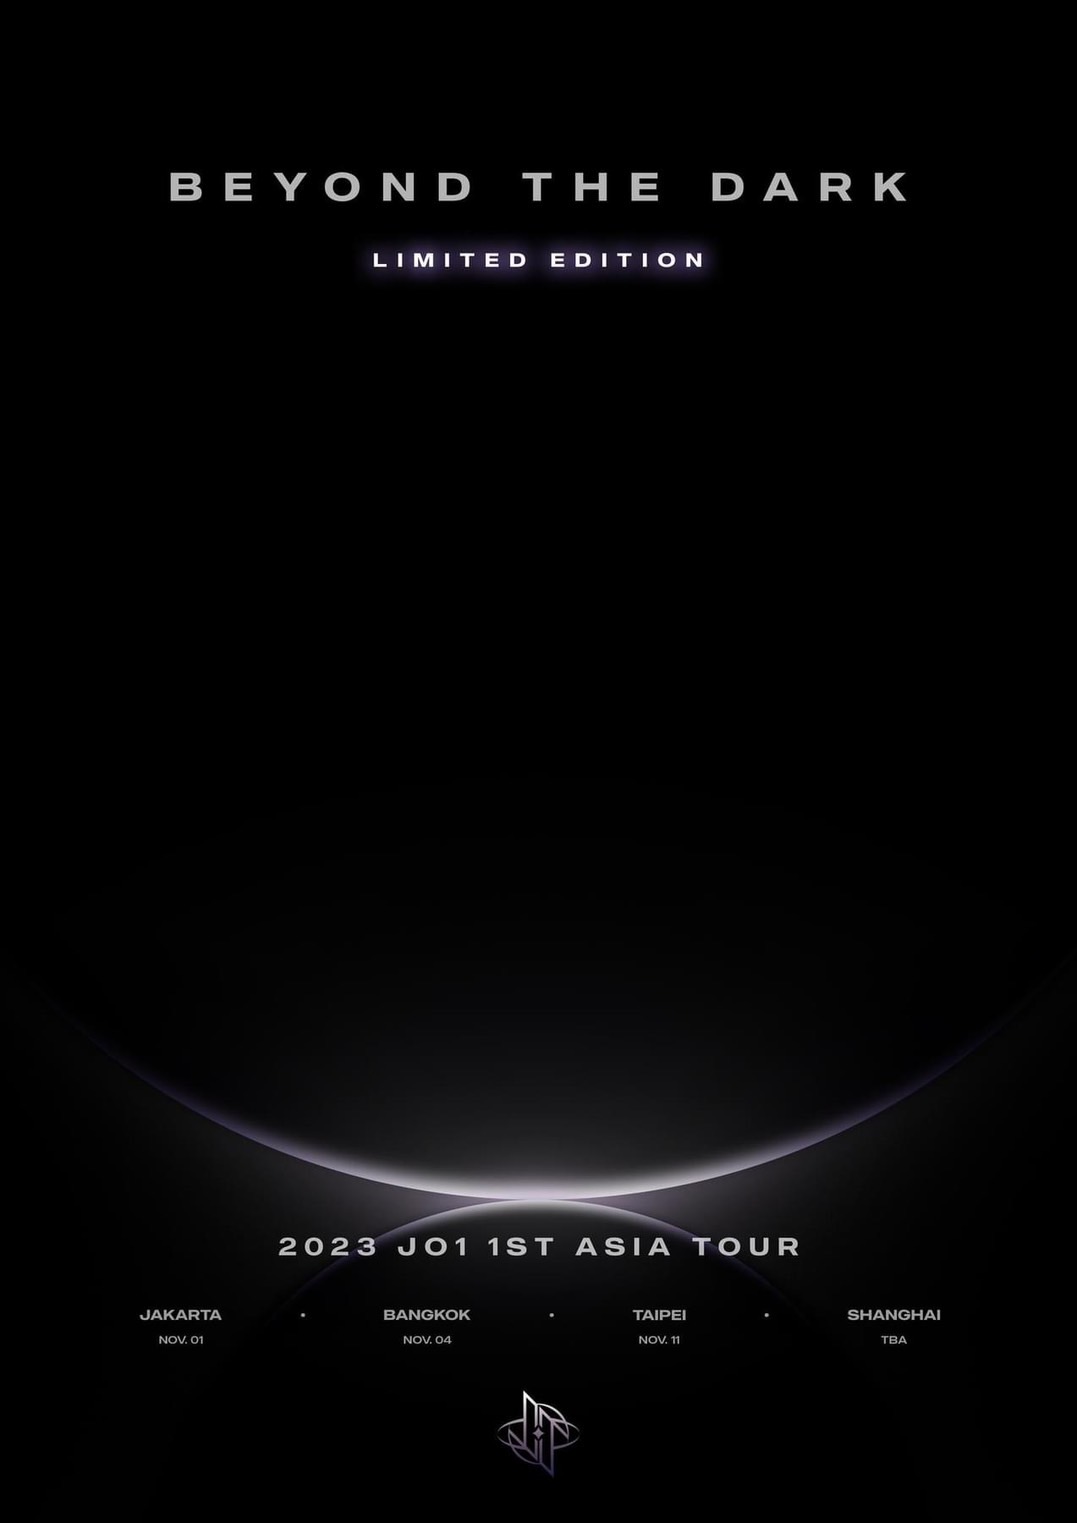 2023 JO1 1ST ASIAN TOUR ‘BEYOND THE DARK’ LIMITED EDITION in Bangkok